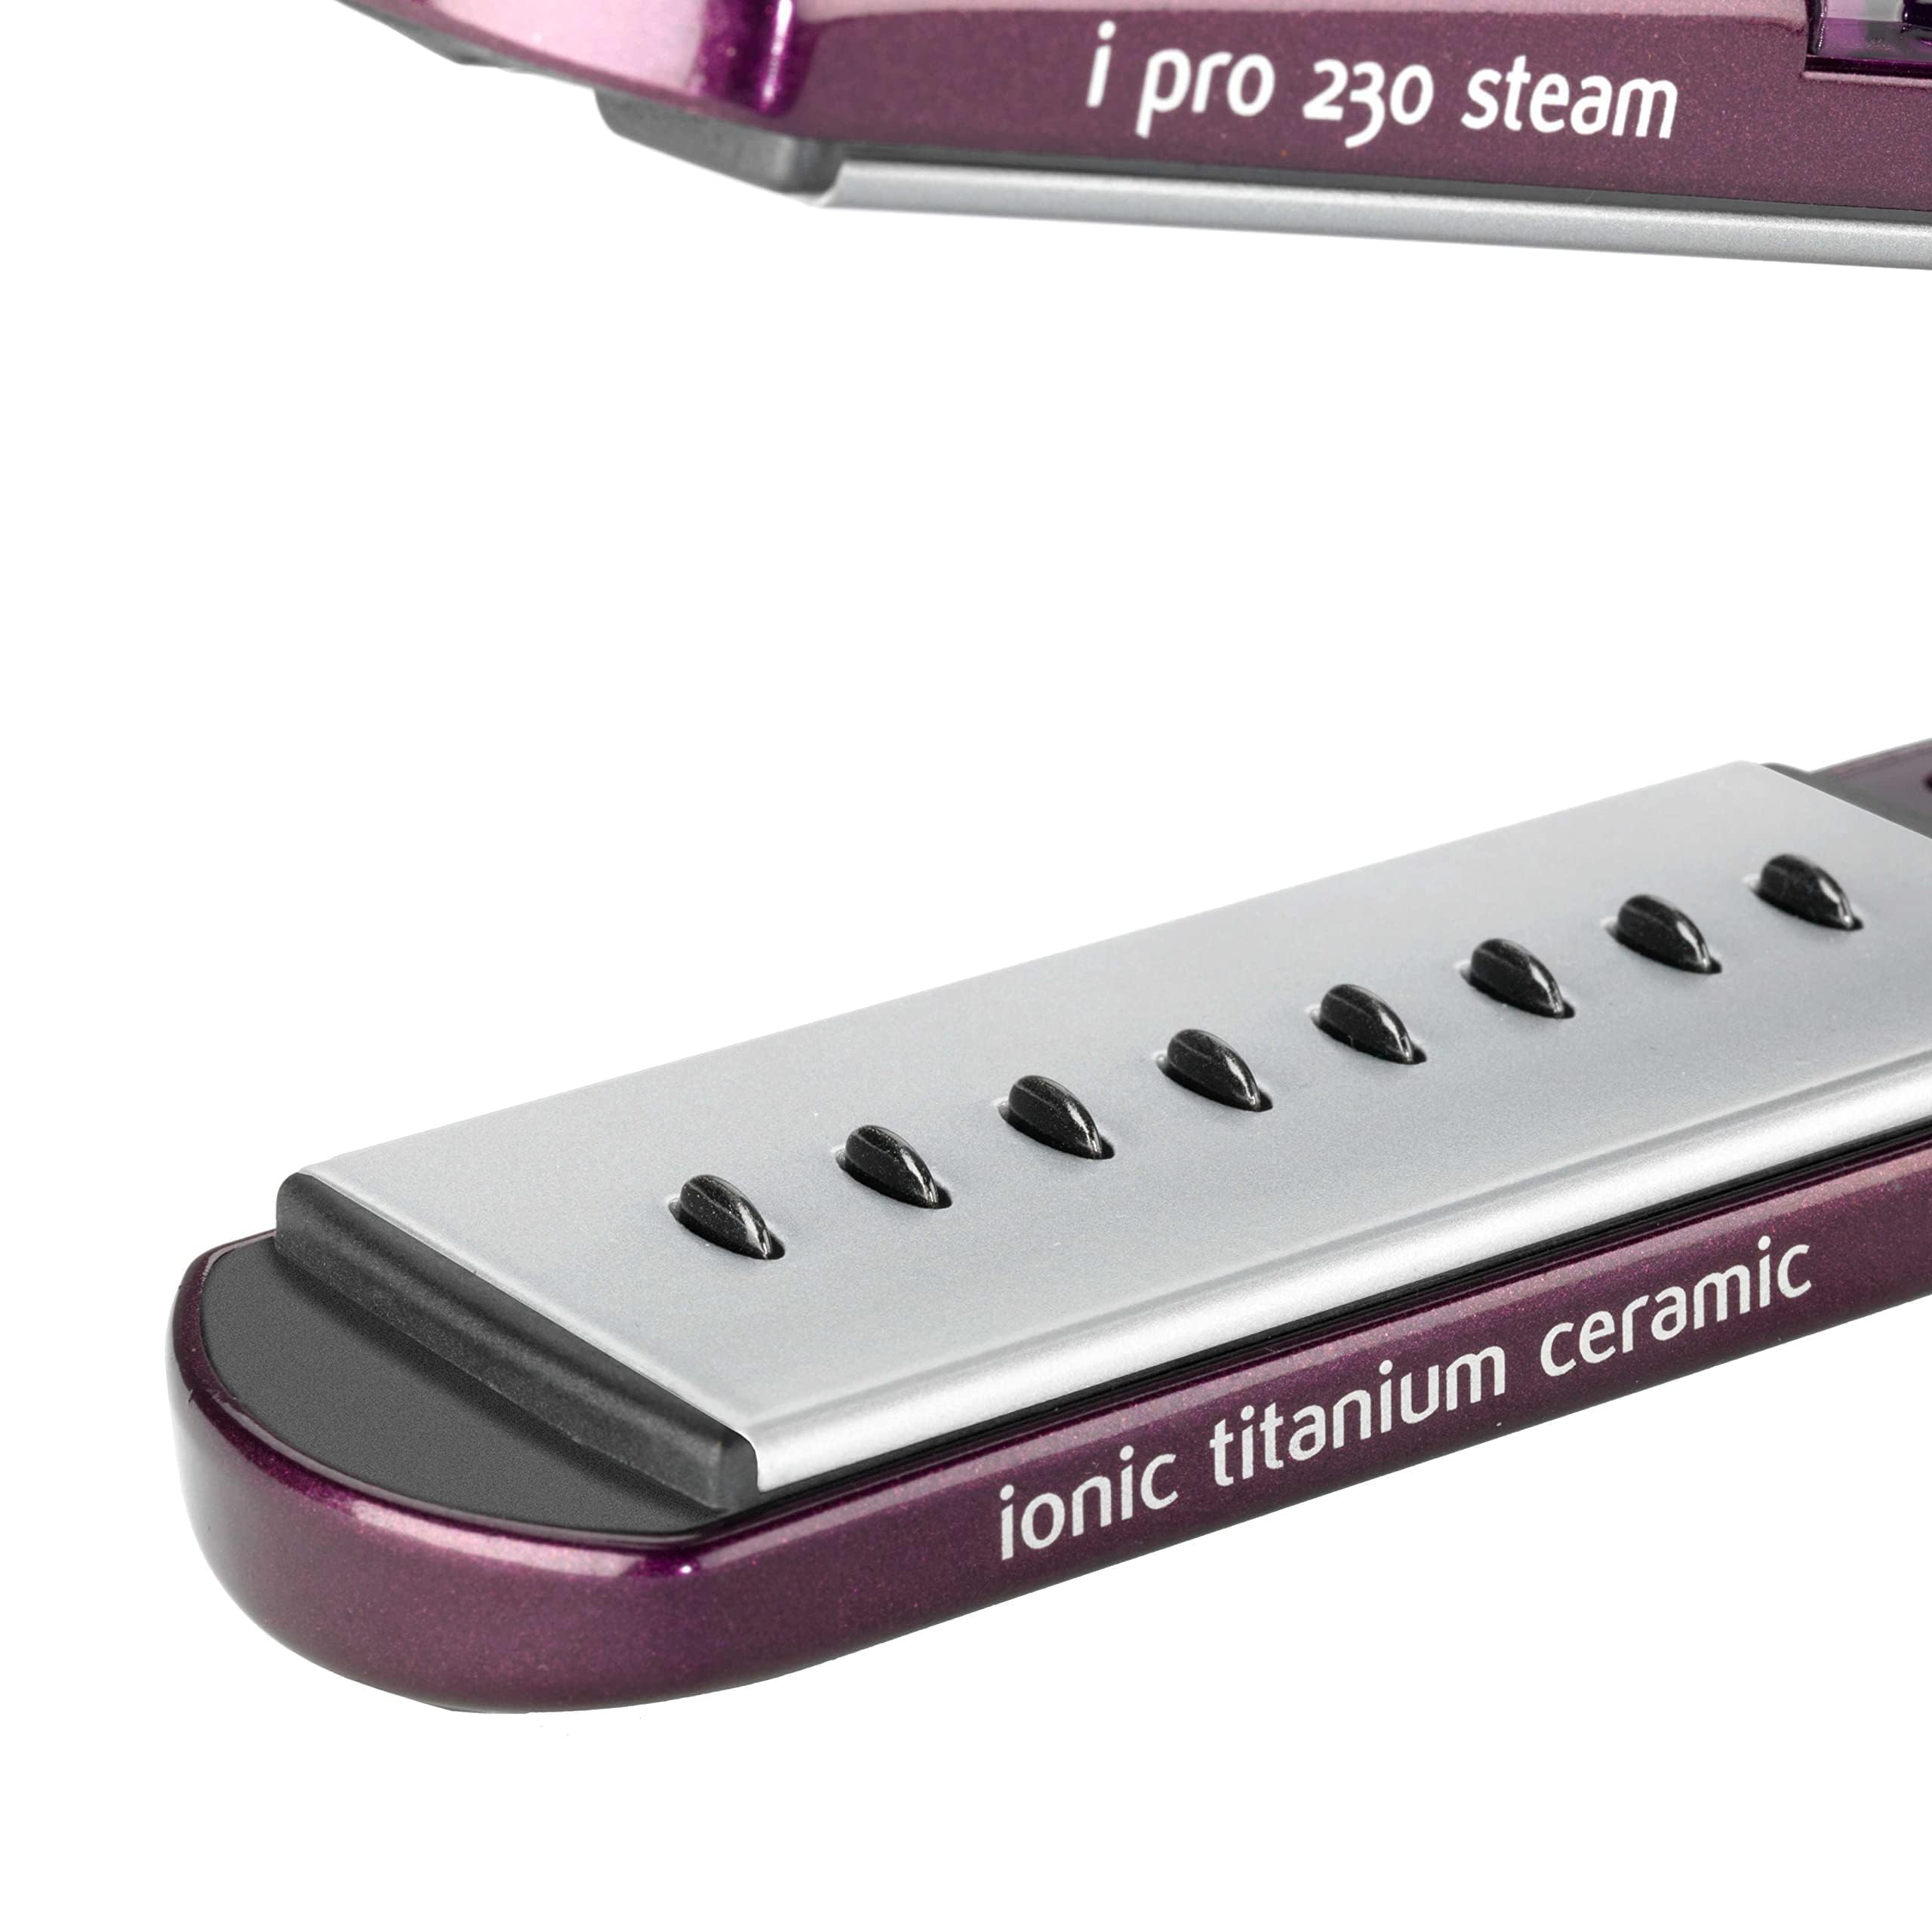 BaByliss 369 Hair Straightener| Nano Titanium Ceramic Coating: Soft And Strong.| High-performance Heating Up To 230°c | Ceramic Plates For Smooth And Shiny Results | ST395SDE(Purple), One Size